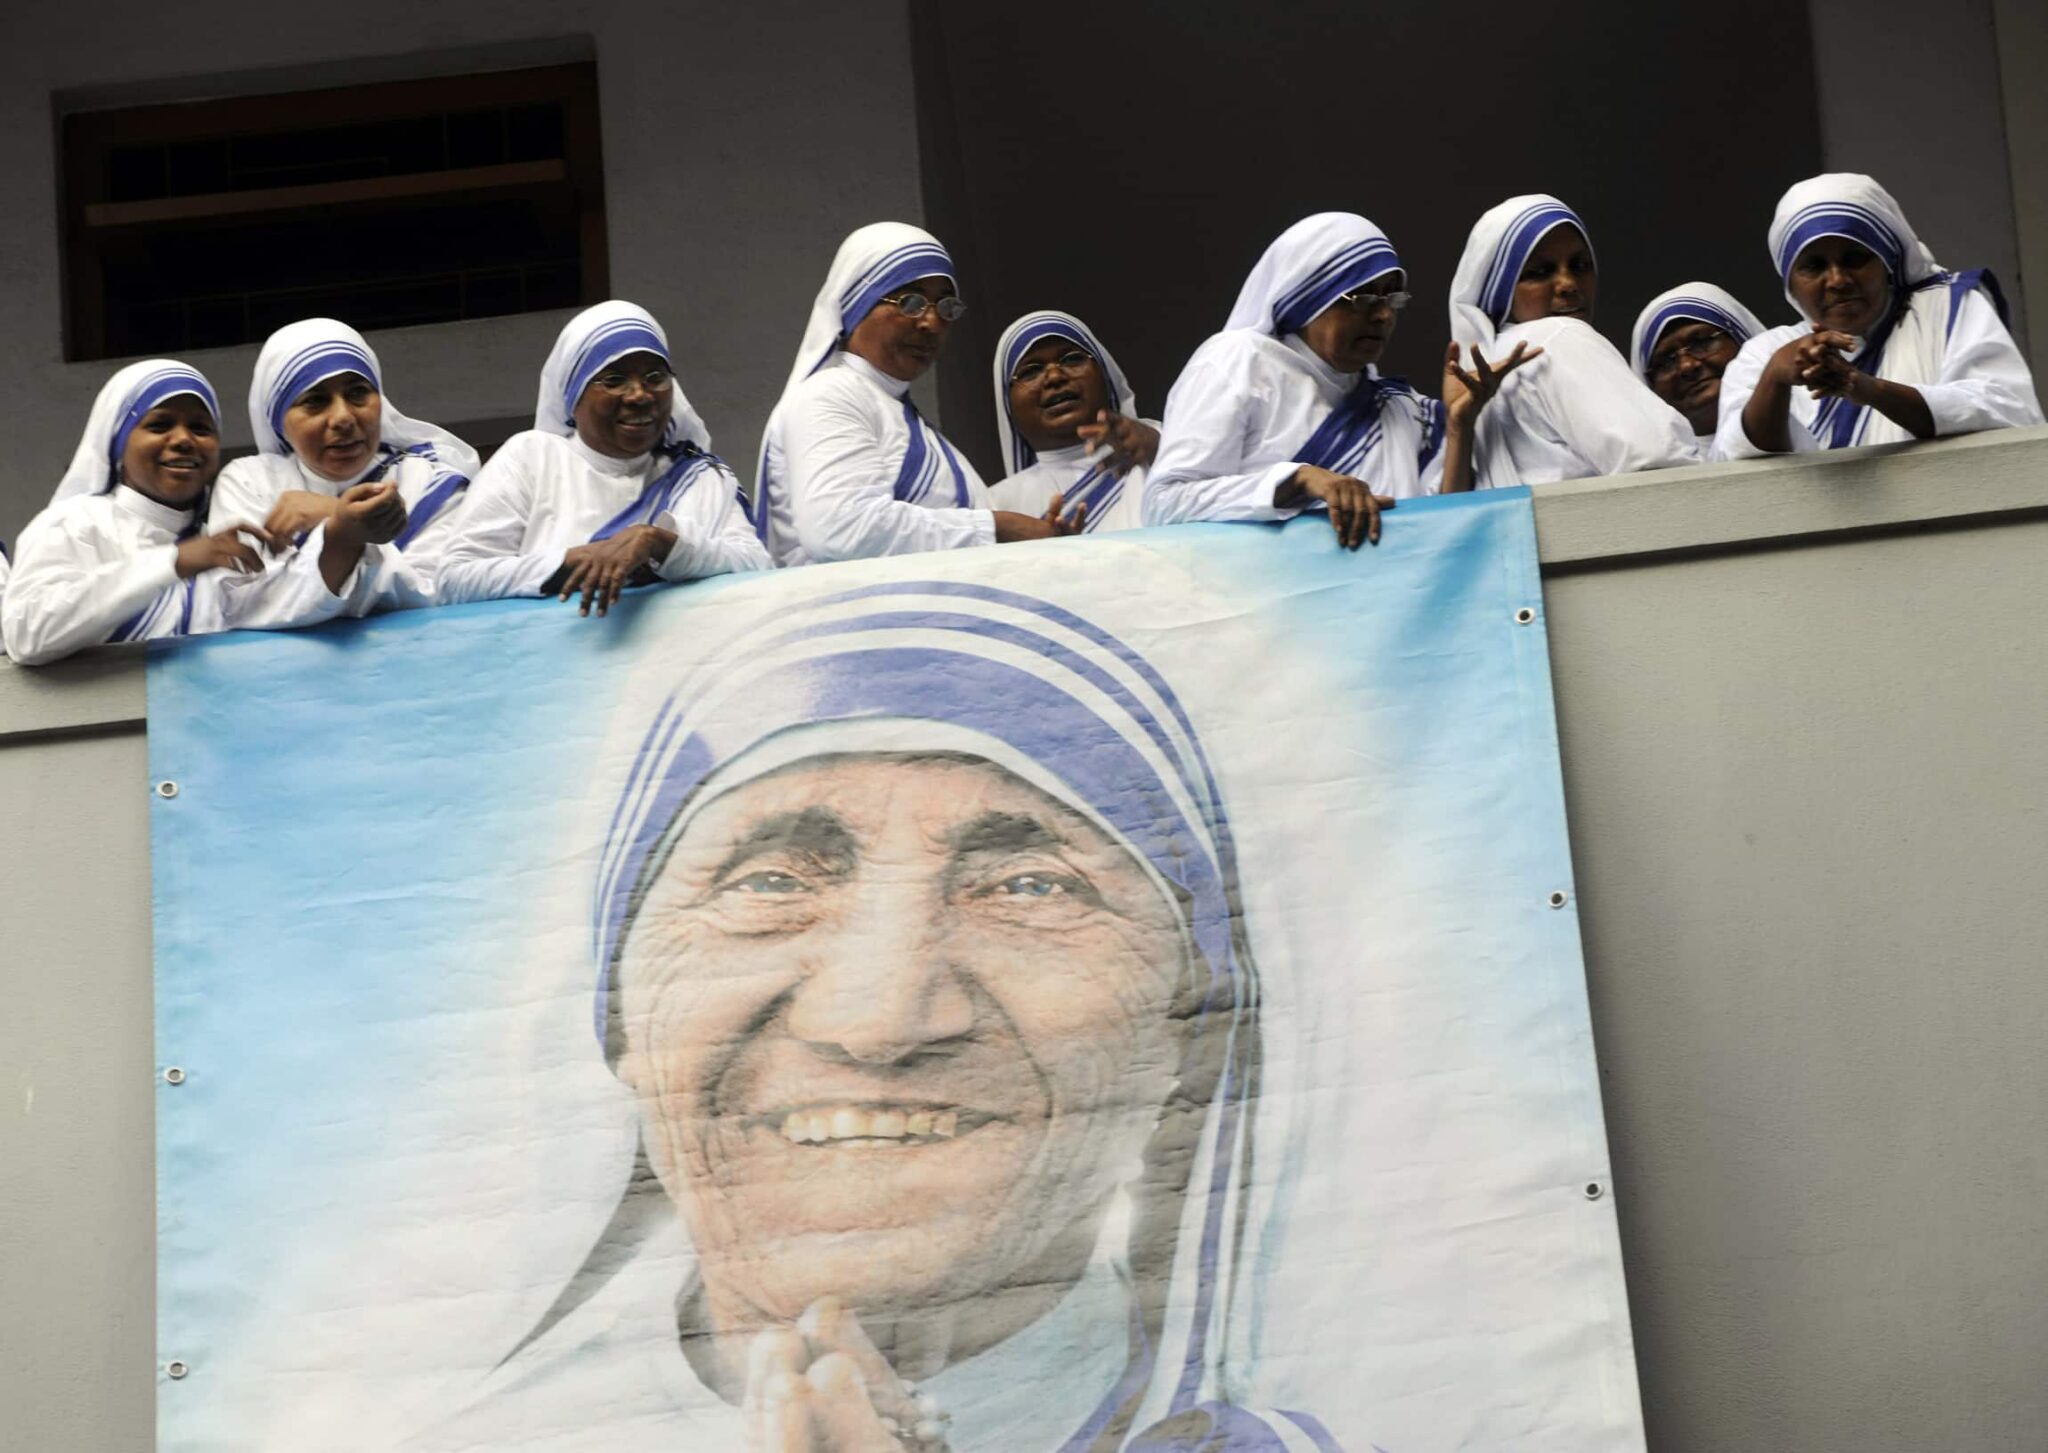 Members of the Missionaries of Charity attend a service marking the 100th anniversary of the birth of Blessed Teresa of Kolkata in this Aug. 26, 2010, file photo. Pope Francis has approved a miracle attributed to the intercession of Blessed Teresa, paving the way for her canonization in 2016. (CNS photo/Deshakalayan Chowdhur, Reuters pool)